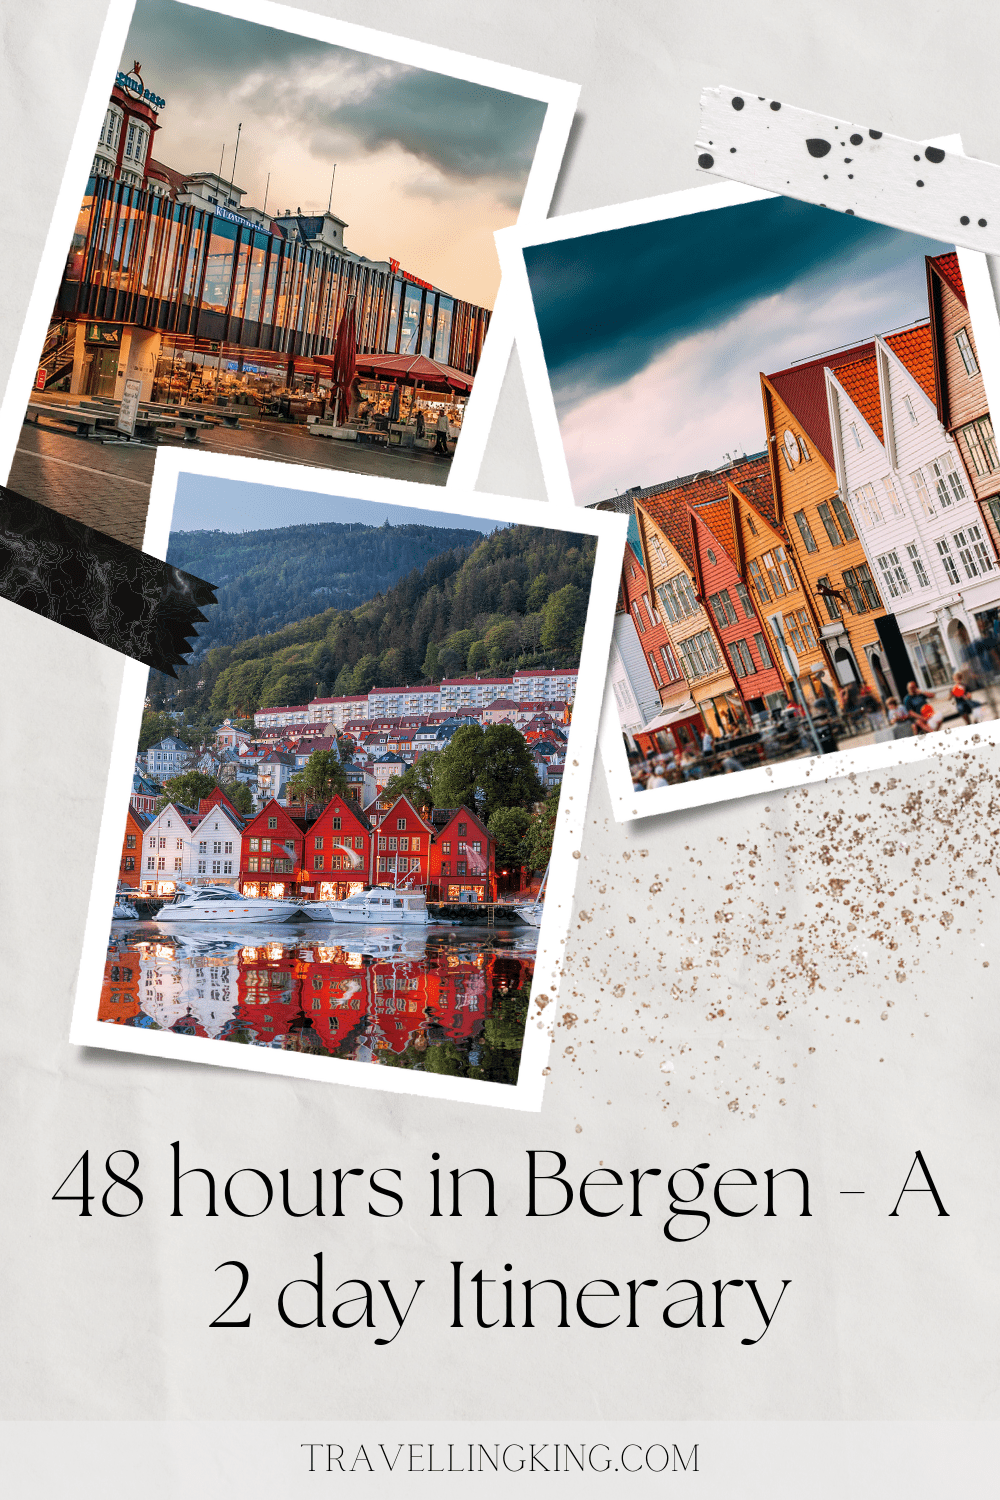 48 hours in Bergen - A 2 day Itinerary